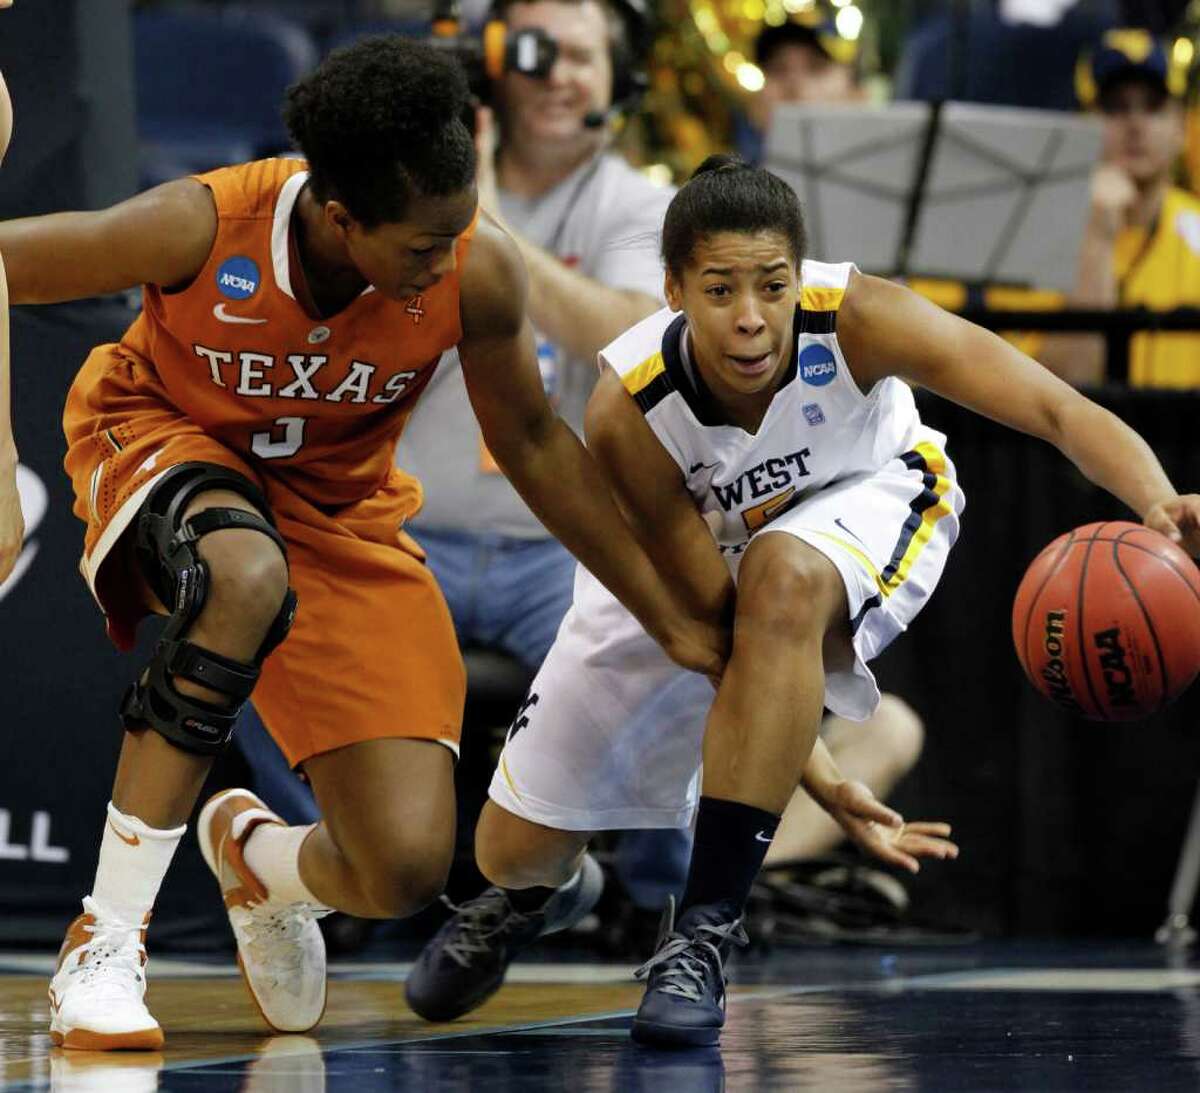 Texas forward Nneka Enemkpali (3) tries to get steal the ball from West Virginia forward Averee Fields (5) during the first half of a first-round NCAA tournament women's college basketball game in Norfolk, Va., Saturday, March 17, 2012. (AP Photo/Steve Helber)